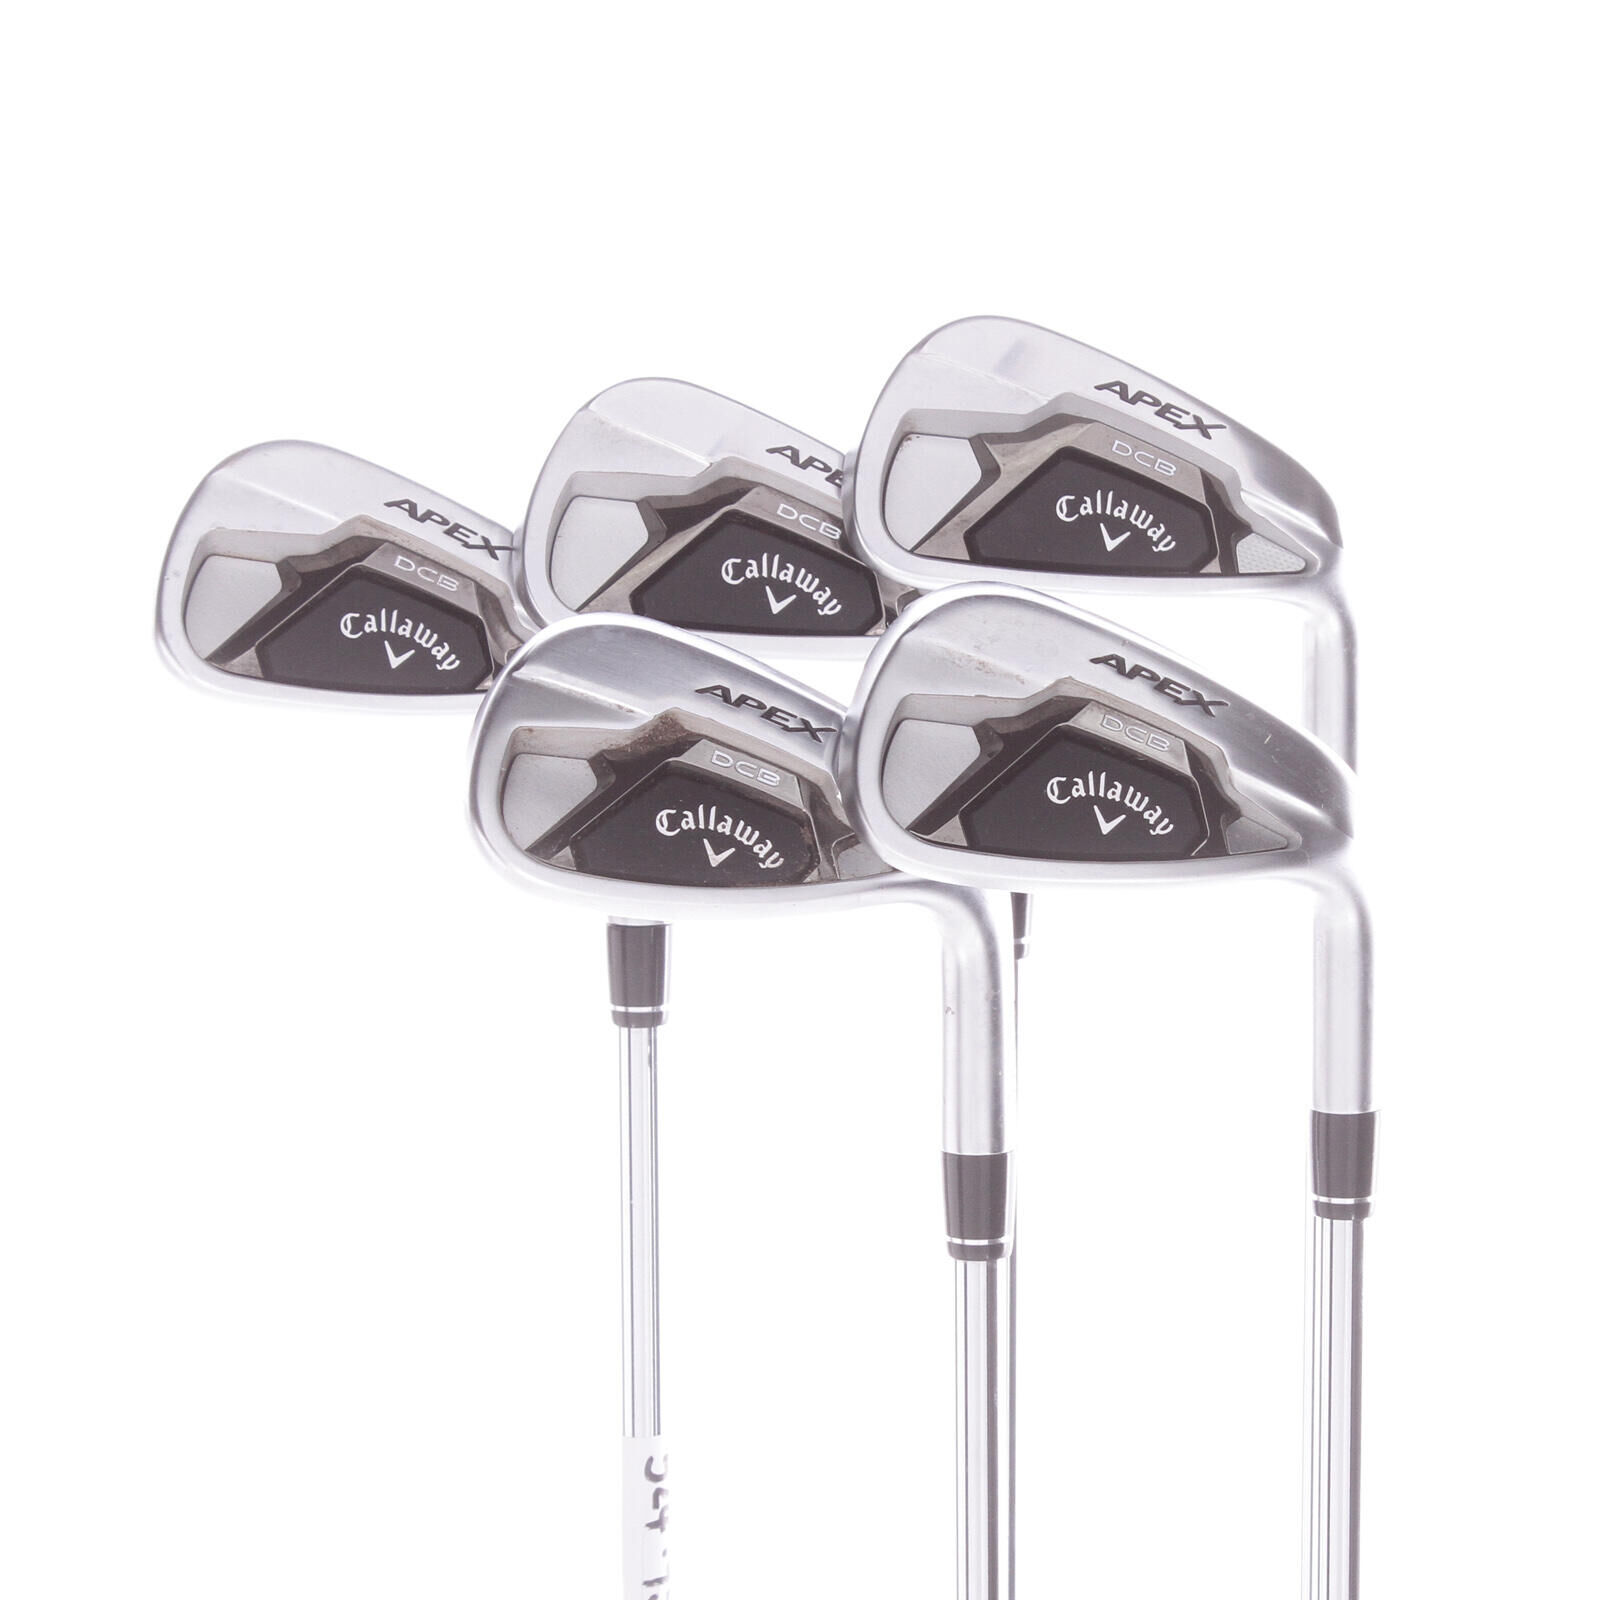 CALLAWAY USED - Iron Set 6-PW Callaway Apex DCB Forged Steel Shaft Right Hand - GRADE B